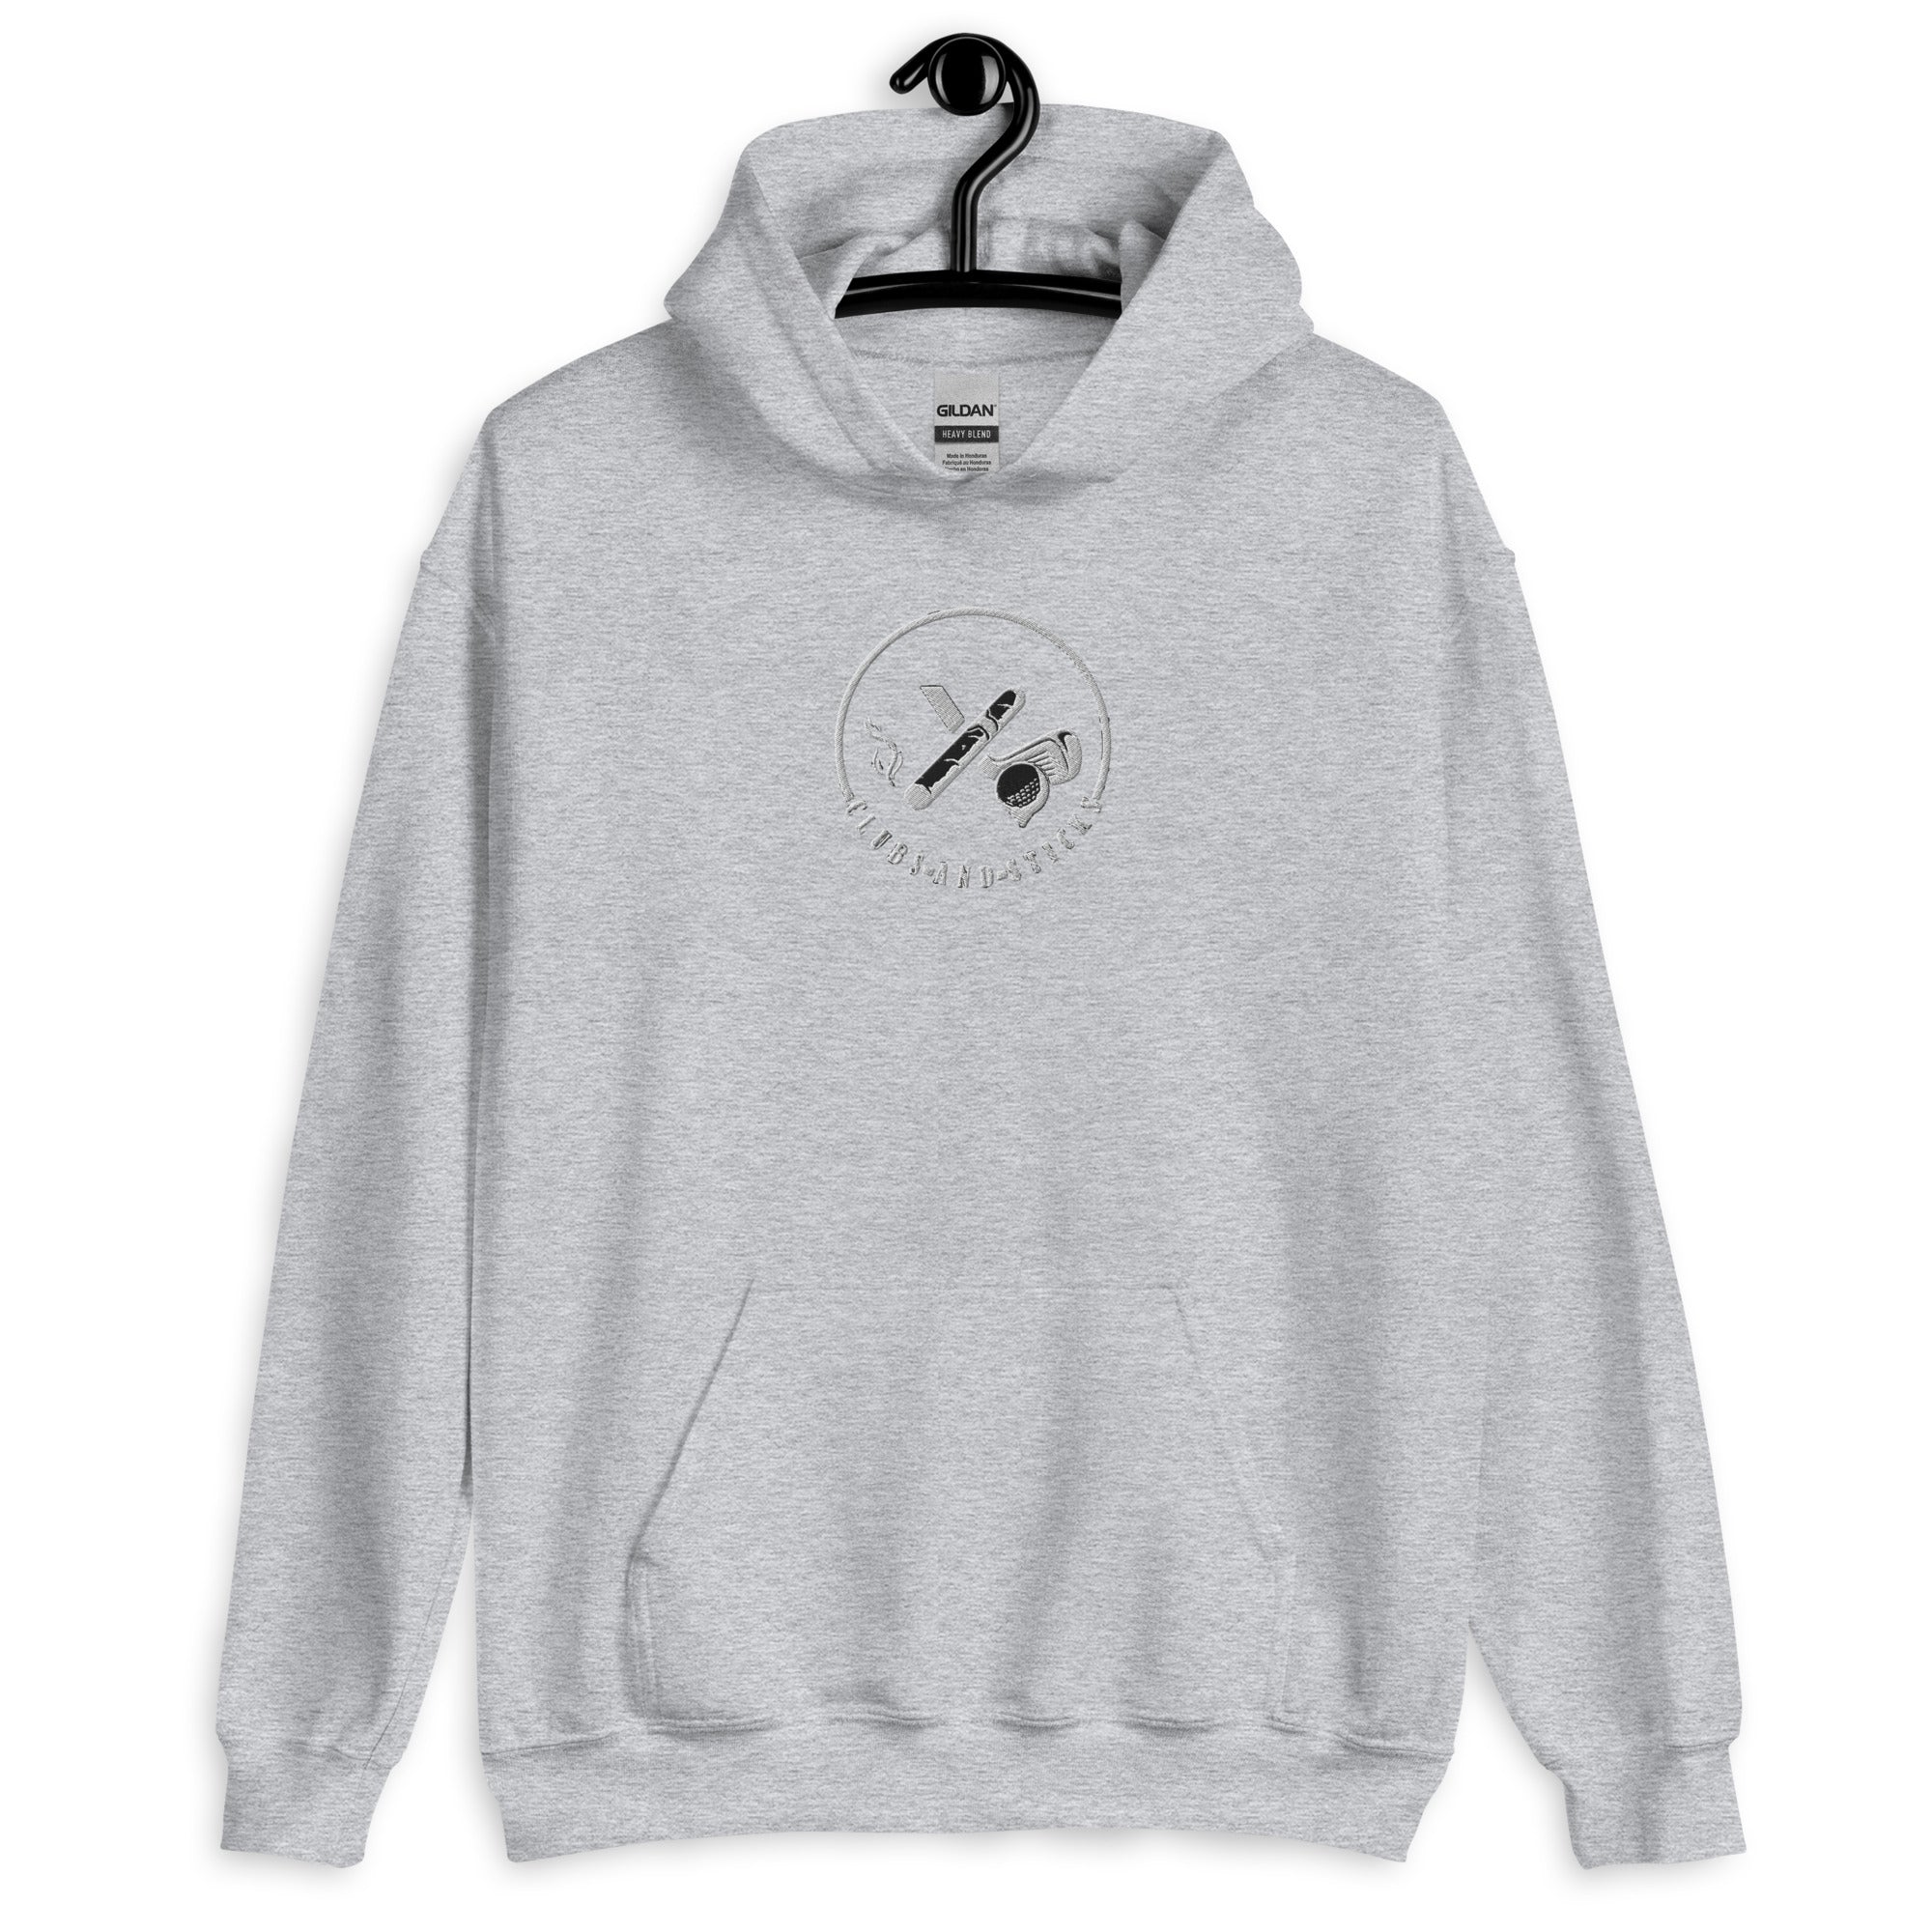 Club and Sticks Ladies Embroidered Hoodie - White Logo